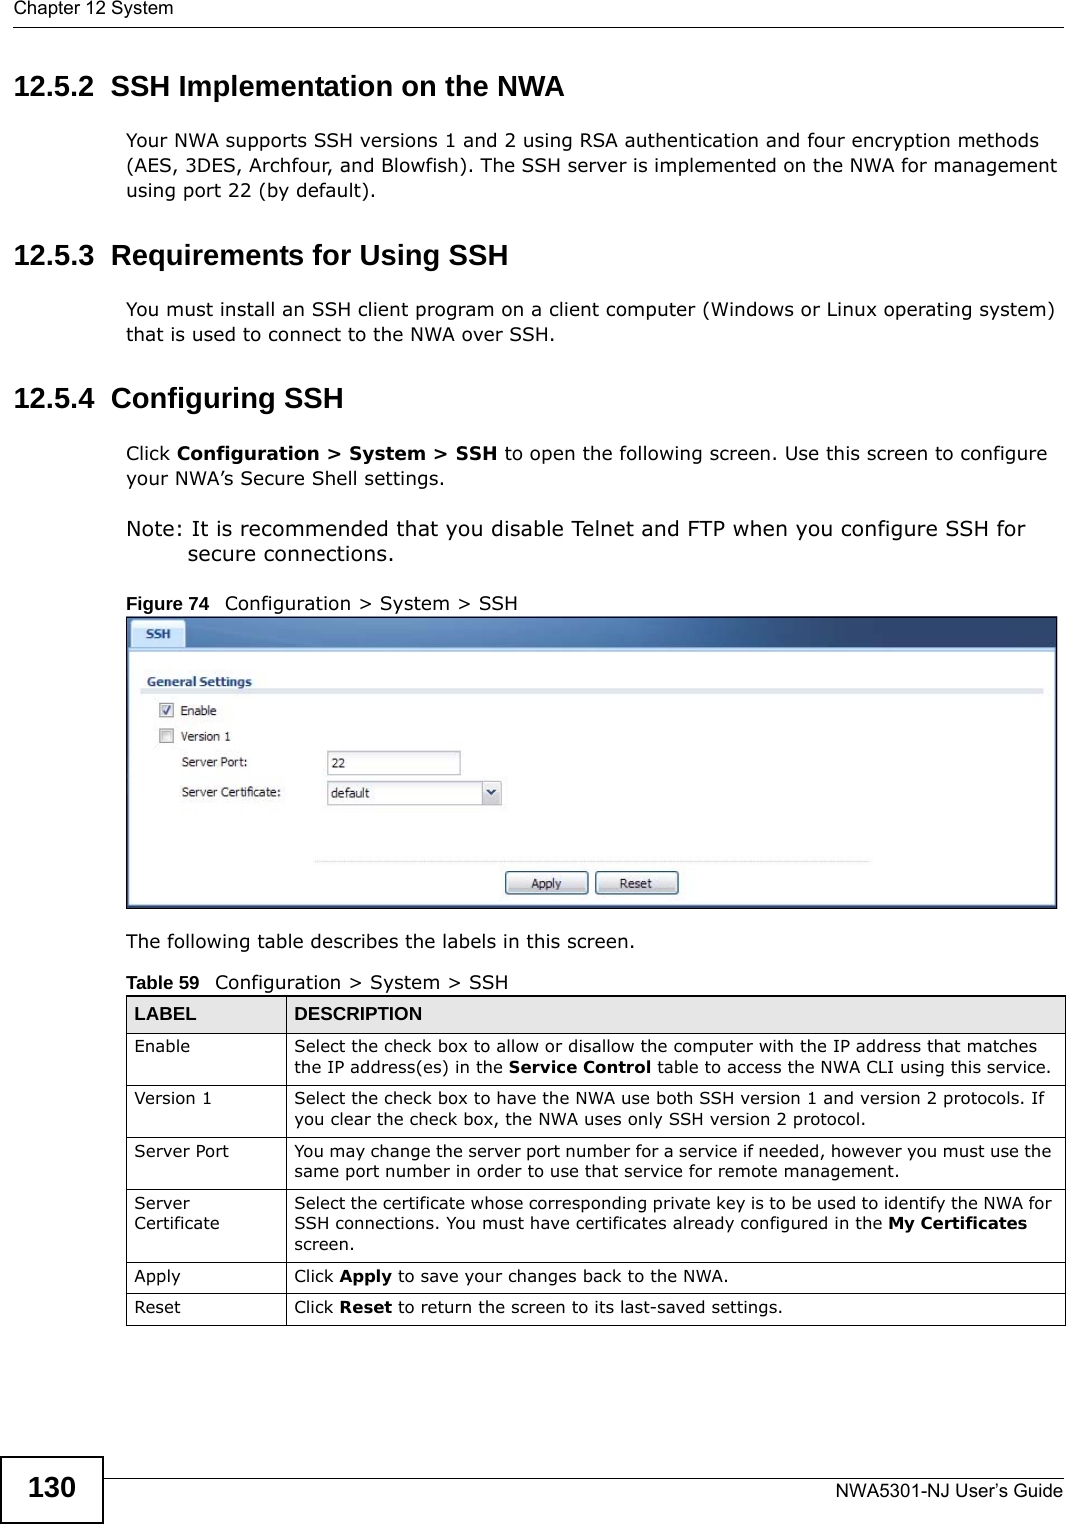 Chapter 12 SystemNWA5301-NJ User’s Guide13012.5.2  SSH Implementation on the NWAYour NWA supports SSH versions 1 and 2 using RSA authentication and four encryption methods (AES, 3DES, Archfour, and Blowfish). The SSH server is implemented on the NWA for management using port 22 (by default). 12.5.3  Requirements for Using SSHYou must install an SSH client program on a client computer (Windows or Linux operating system) that is used to connect to the NWA over SSH.12.5.4  Configuring SSHClick Configuration &gt; System &gt; SSH to open the following screen. Use this screen to configure your NWA’s Secure Shell settings.Note: It is recommended that you disable Telnet and FTP when you configure SSH for secure connections.Figure 74   Configuration &gt; System &gt; SSHThe following table describes the labels in this screen.  Table 59   Configuration &gt; System &gt; SSHLABEL DESCRIPTIONEnable Select the check box to allow or disallow the computer with the IP address that matches the IP address(es) in the Service Control table to access the NWA CLI using this service.Version 1 Select the check box to have the NWA use both SSH version 1 and version 2 protocols. If you clear the check box, the NWA uses only SSH version 2 protocol.Server Port You may change the server port number for a service if needed, however you must use the same port number in order to use that service for remote management.Server CertificateSelect the certificate whose corresponding private key is to be used to identify the NWA for SSH connections. You must have certificates already configured in the My Certificates screen.Apply Click Apply to save your changes back to the NWA. Reset Click Reset to return the screen to its last-saved settings. 